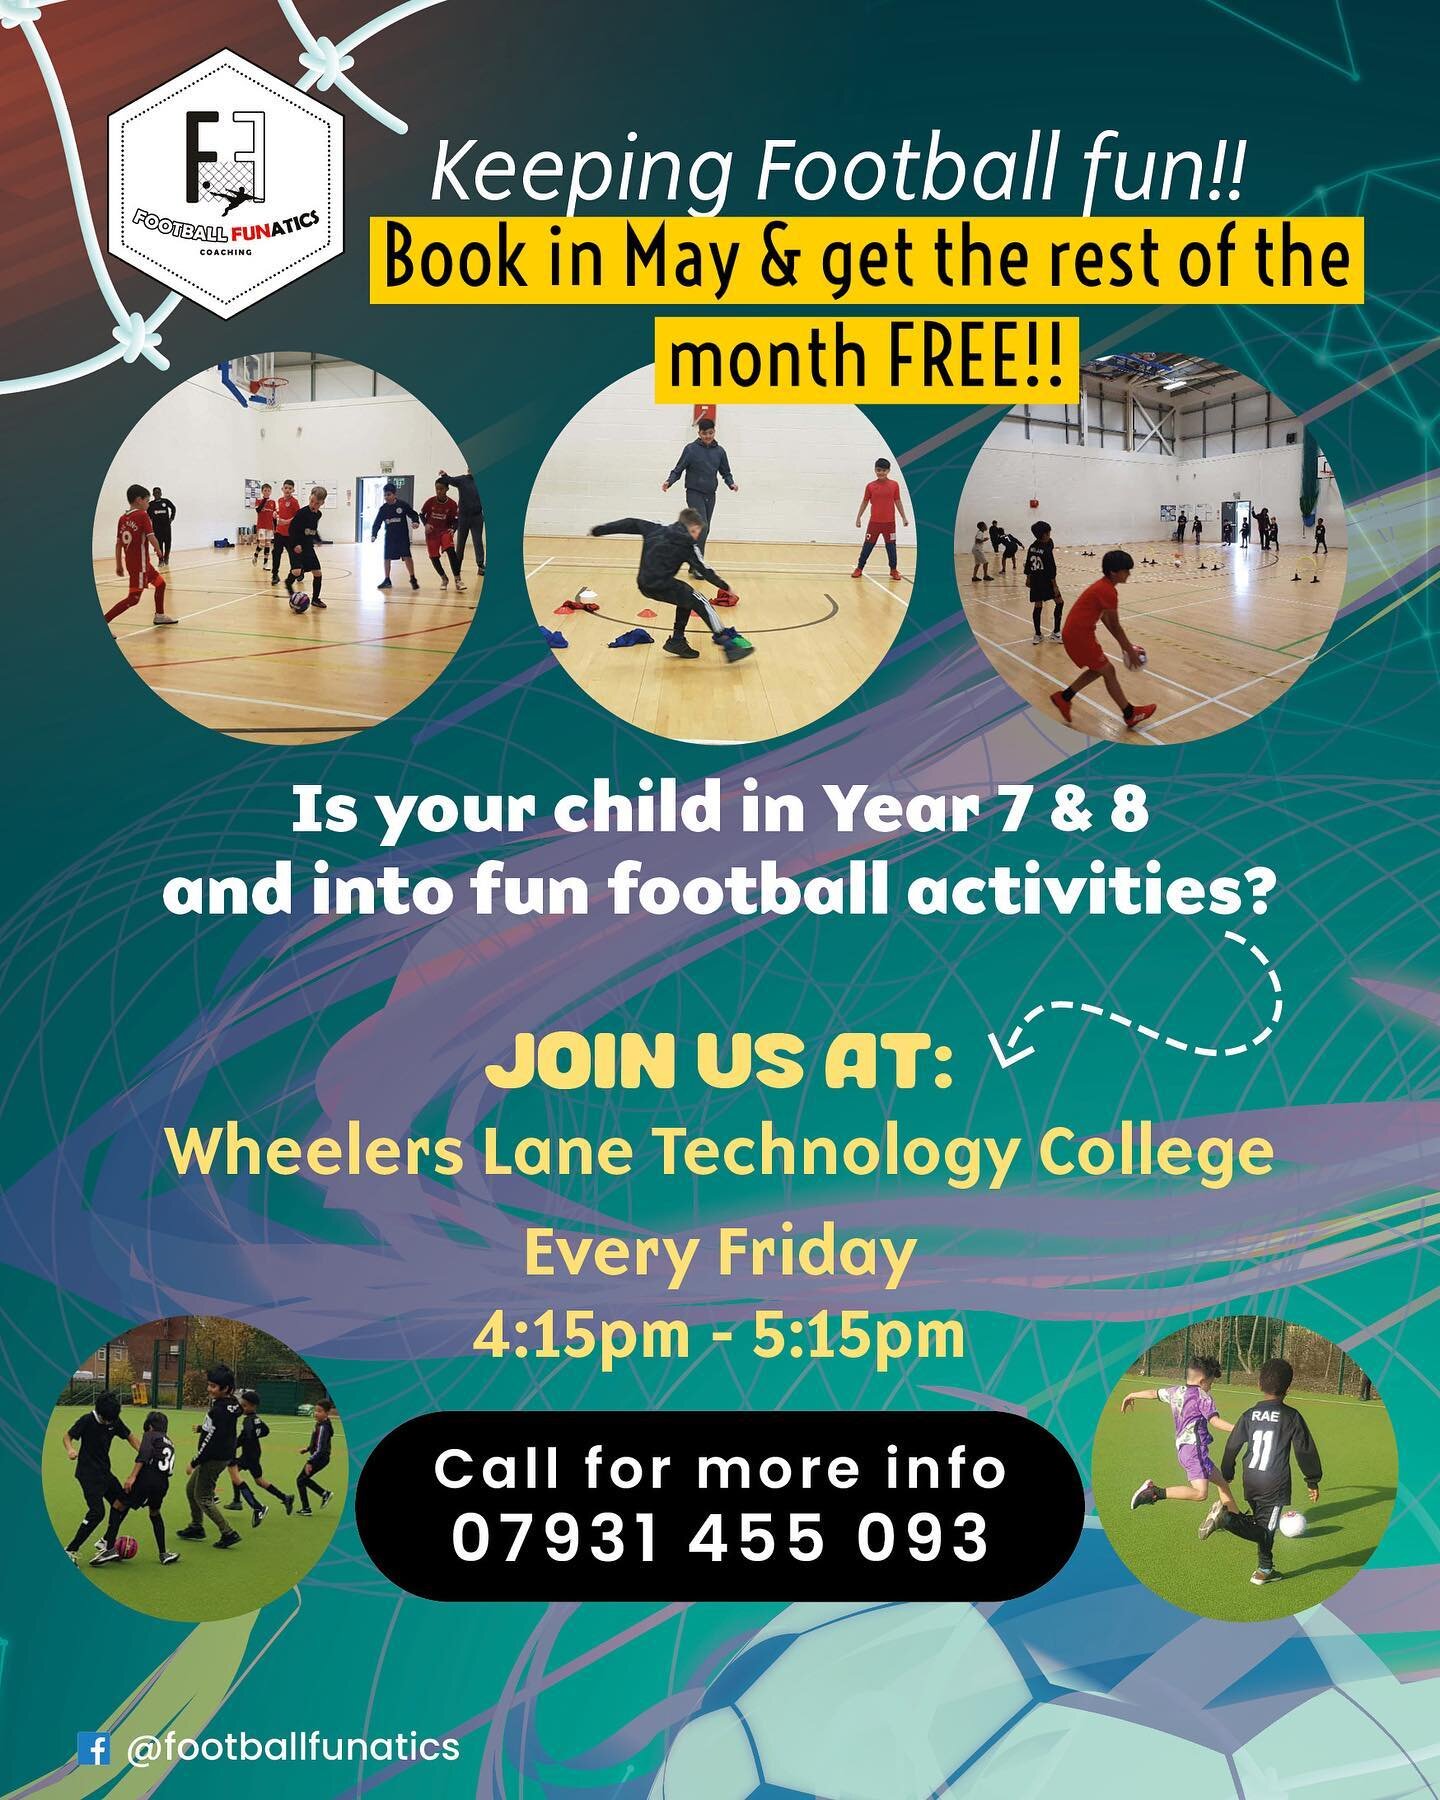 Not long left to catch this offer get yourself booked in to get the rest of the month absolutely free for these amazing clubs!

Visit www.footballfunatics.co.uk to book today!
#FootballFUNatics #Football #Fun #Club #Group #Friends #Learn #Enjoy #Offe